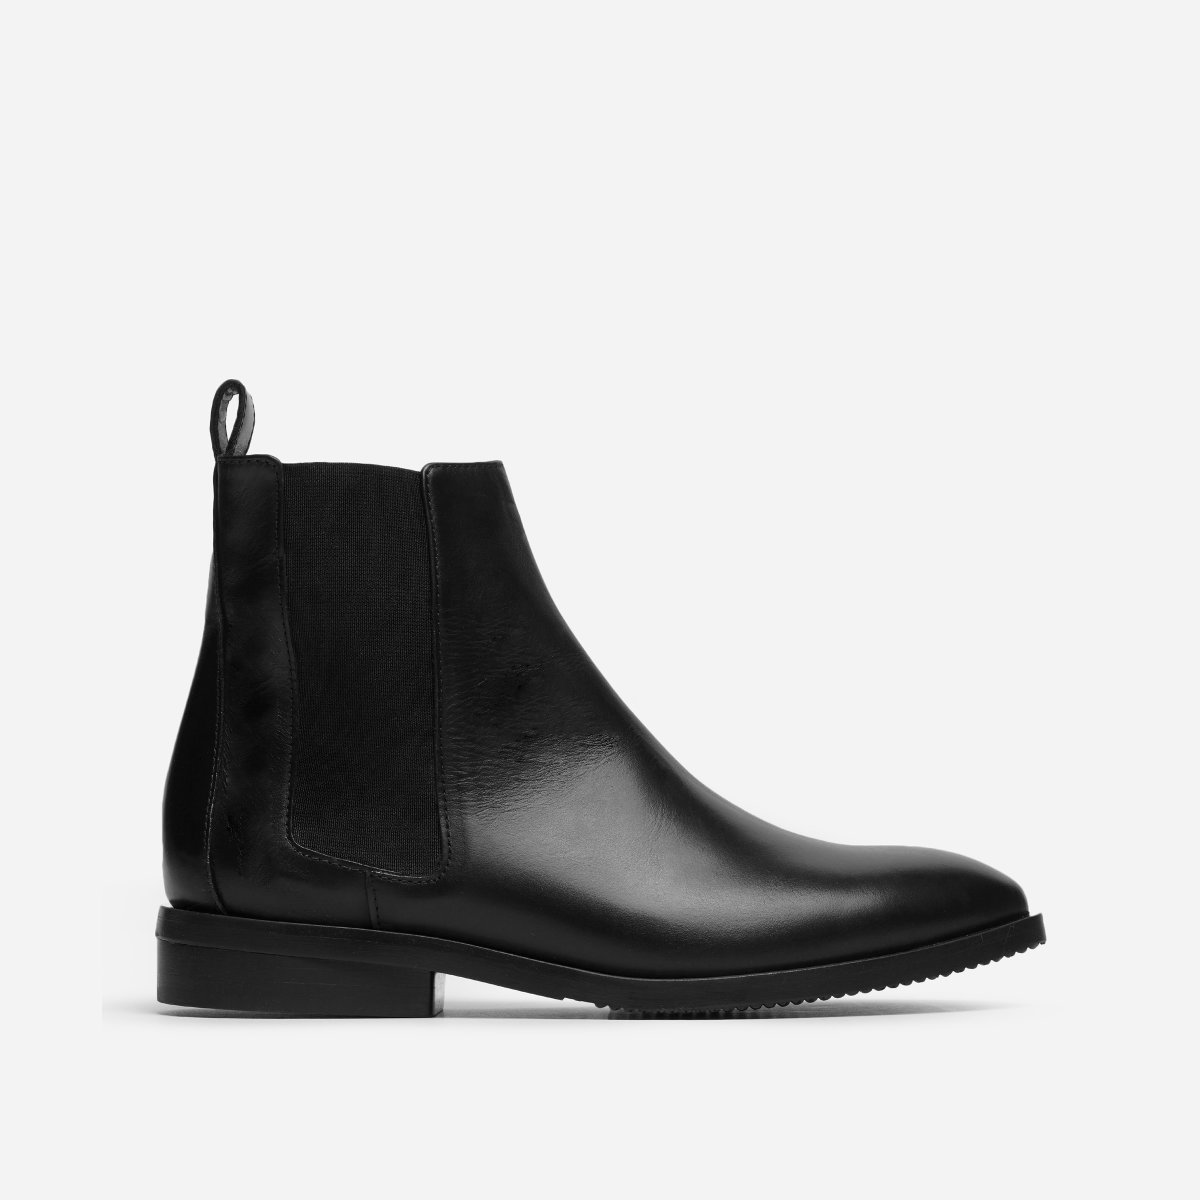 ankle boots that go with everything